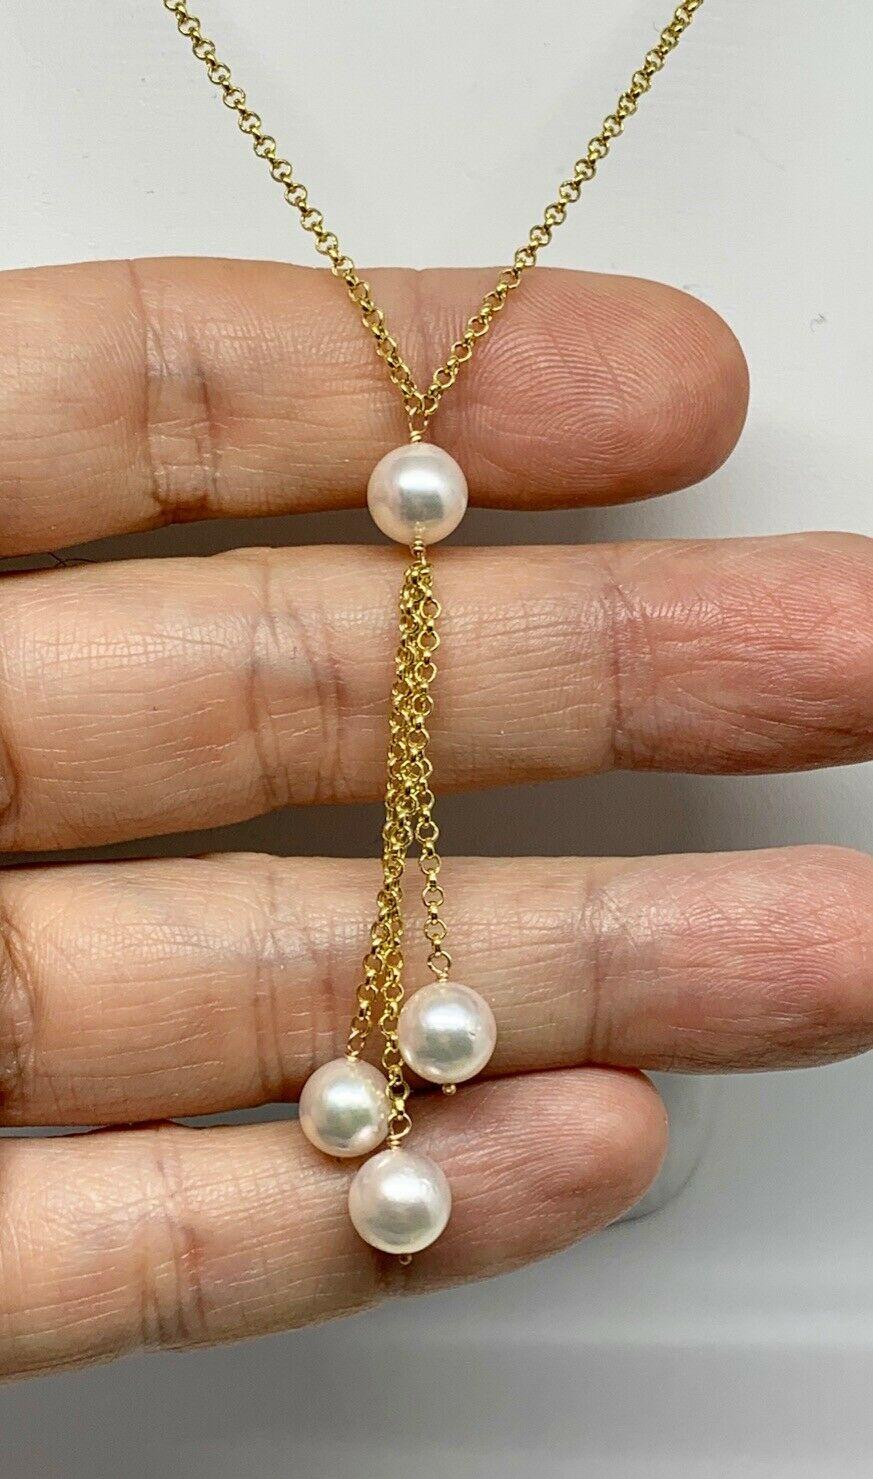 Certified $1,500, GENUINE CULTURED SALTWATER 7.70-7.45MM PEARL 14 KT SOLID YELLOW GOLD 17.75 INCH NECKLACE 21775.
Here is a beautiful new handmade Genuine Saltwater Pearl necklace with a large 14KT  Yellow Gold Mounting.

This item has been